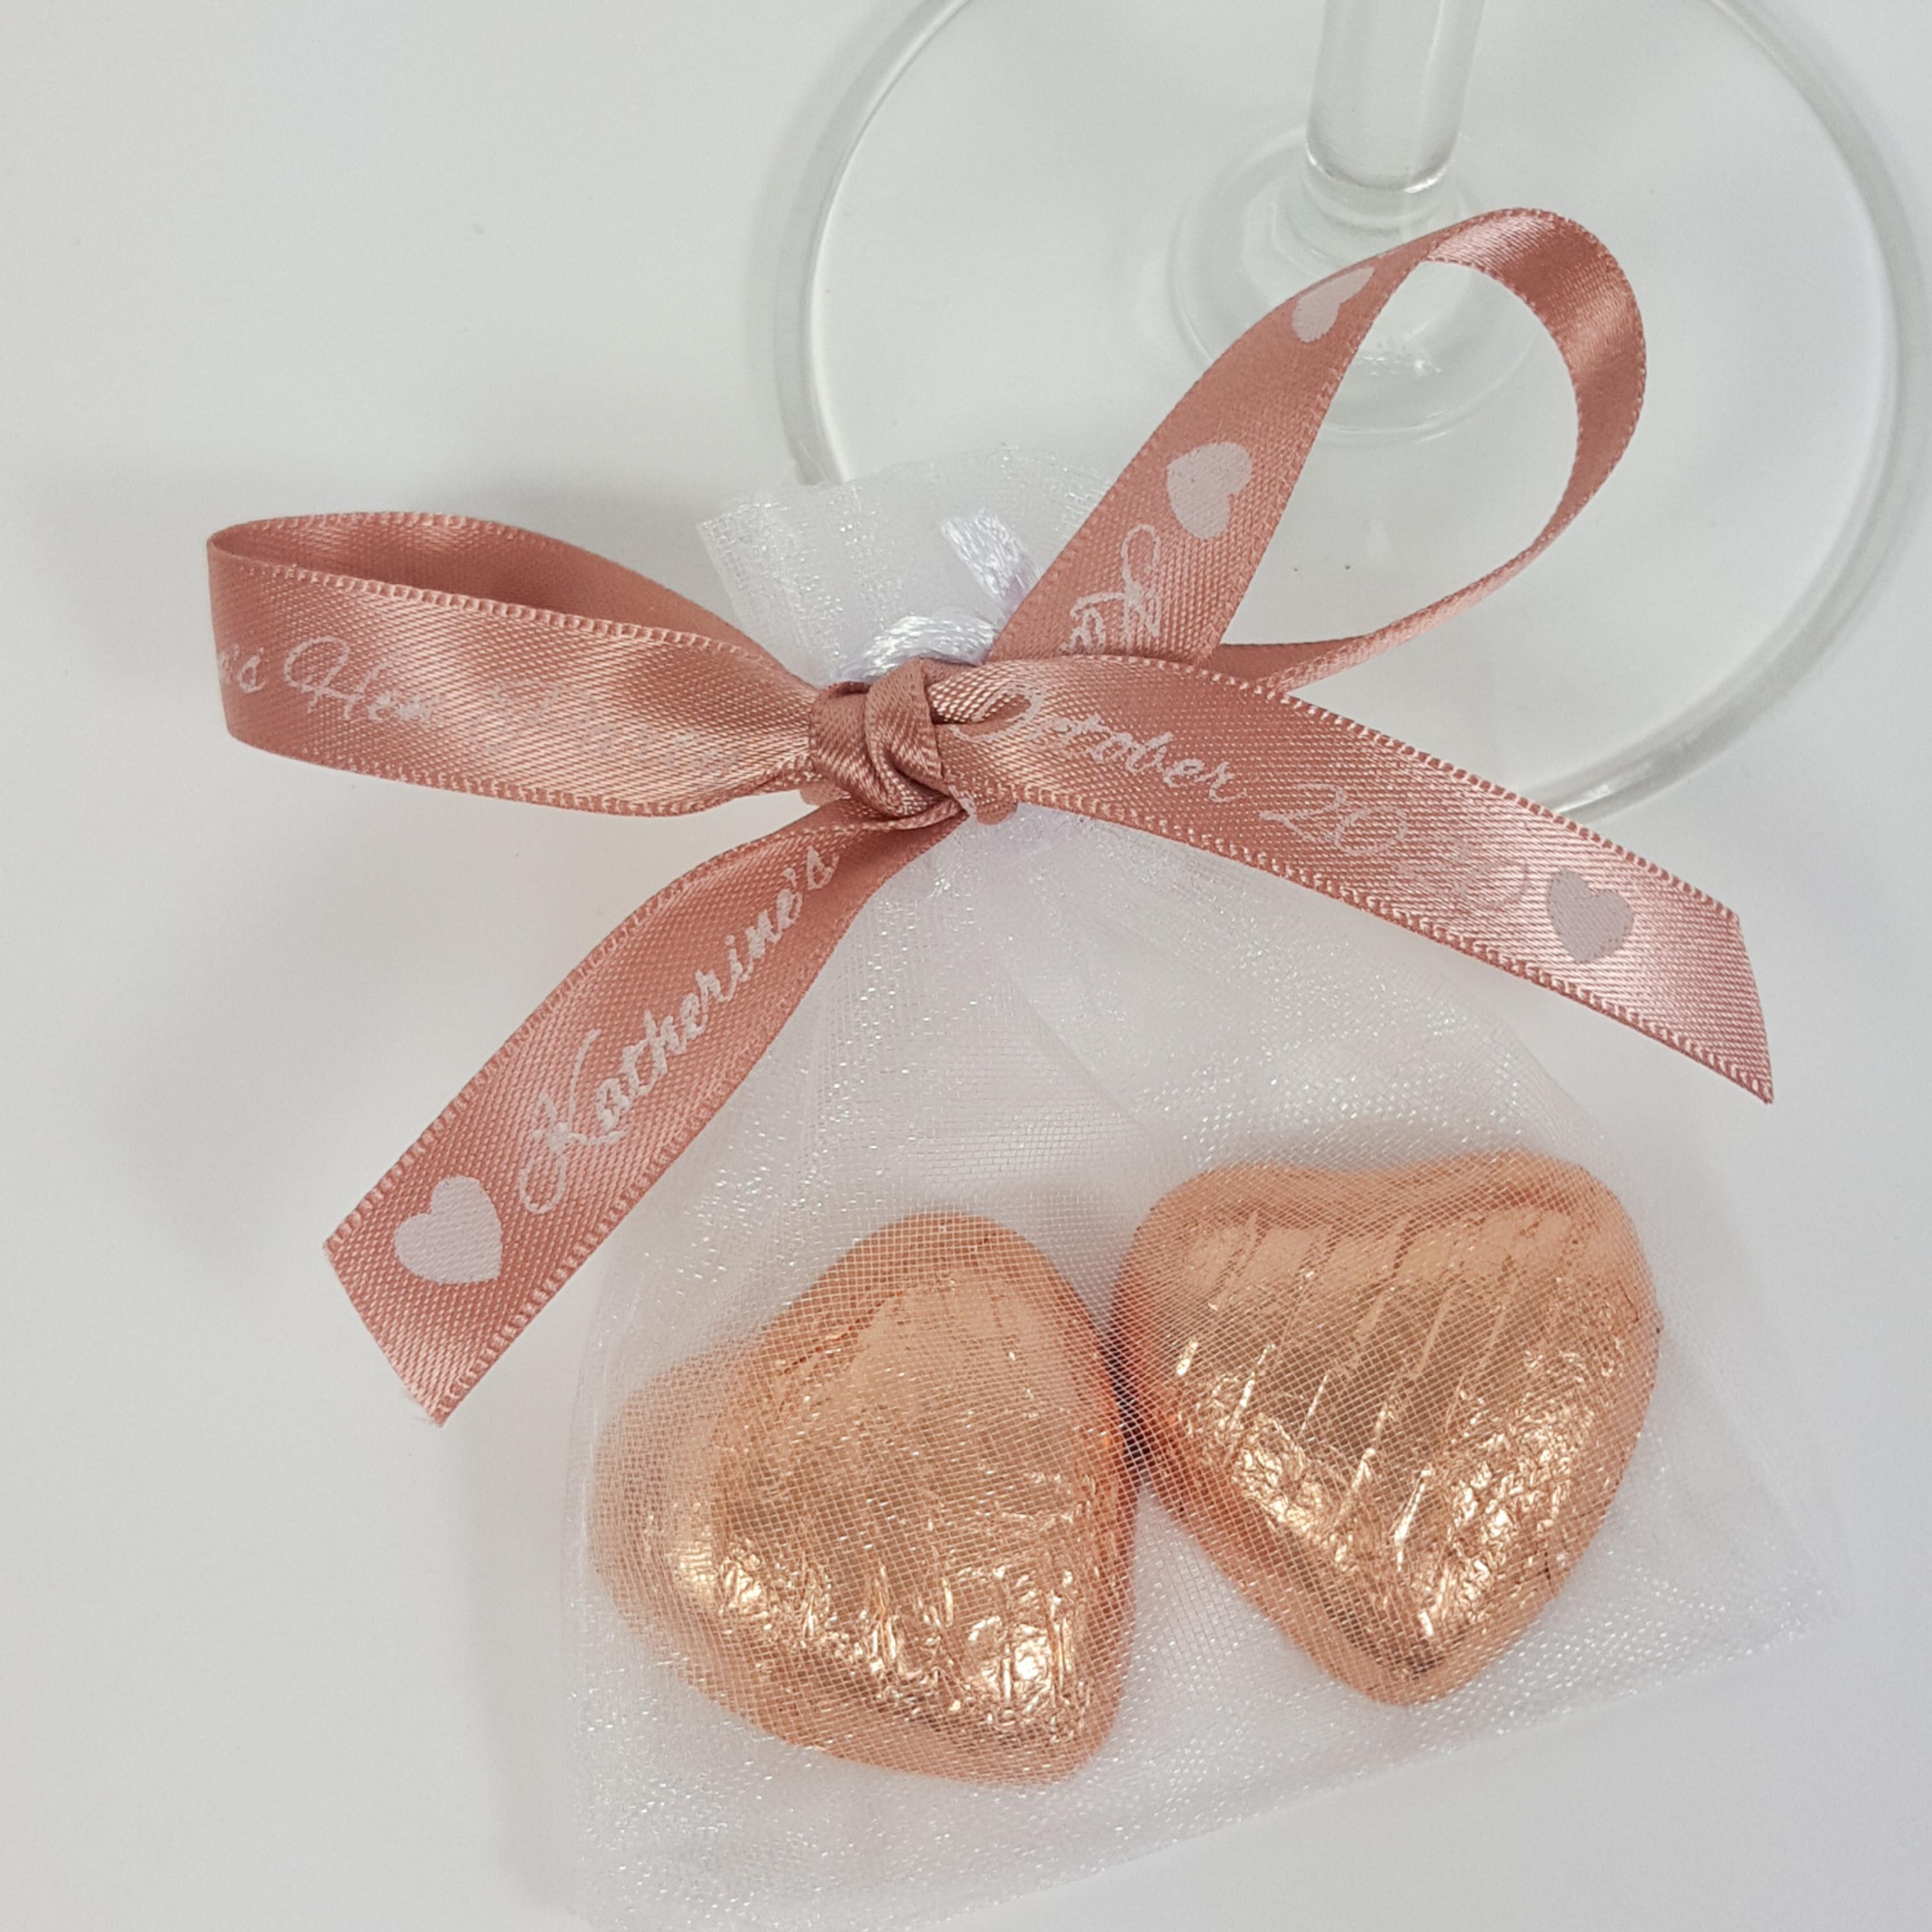 Hen Party Chocolate favours